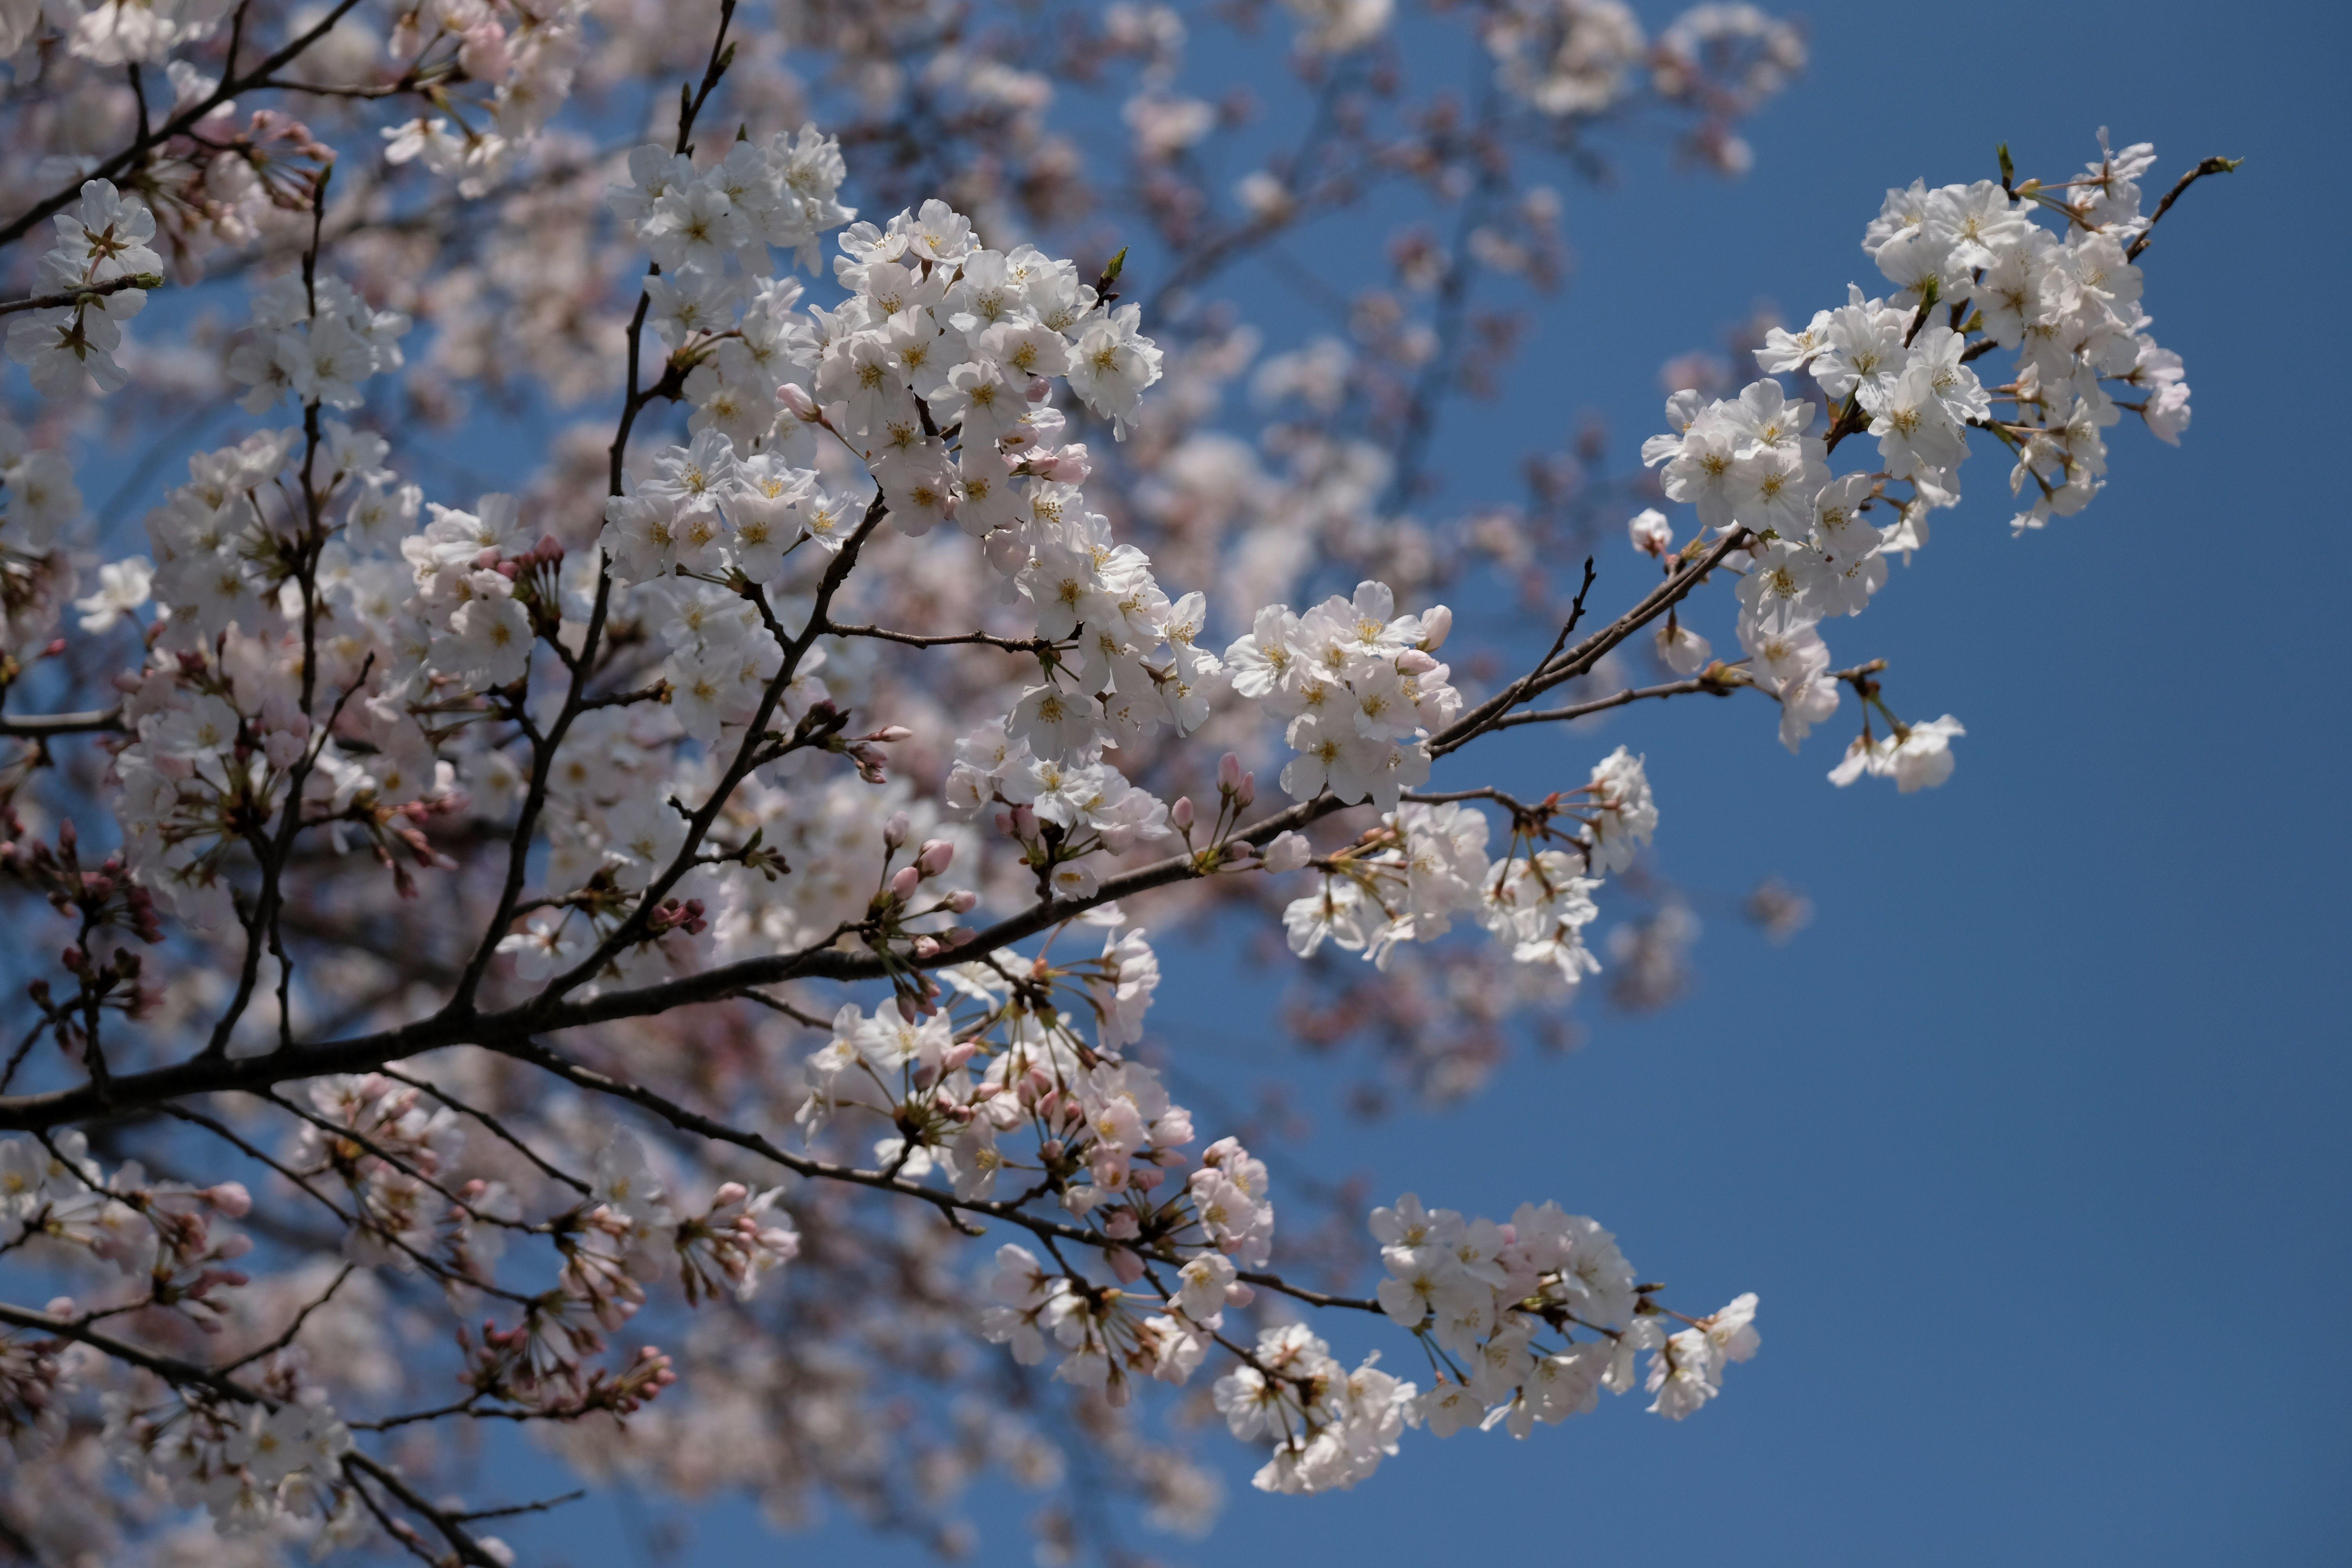 A branch with cherry blossoms blooming.